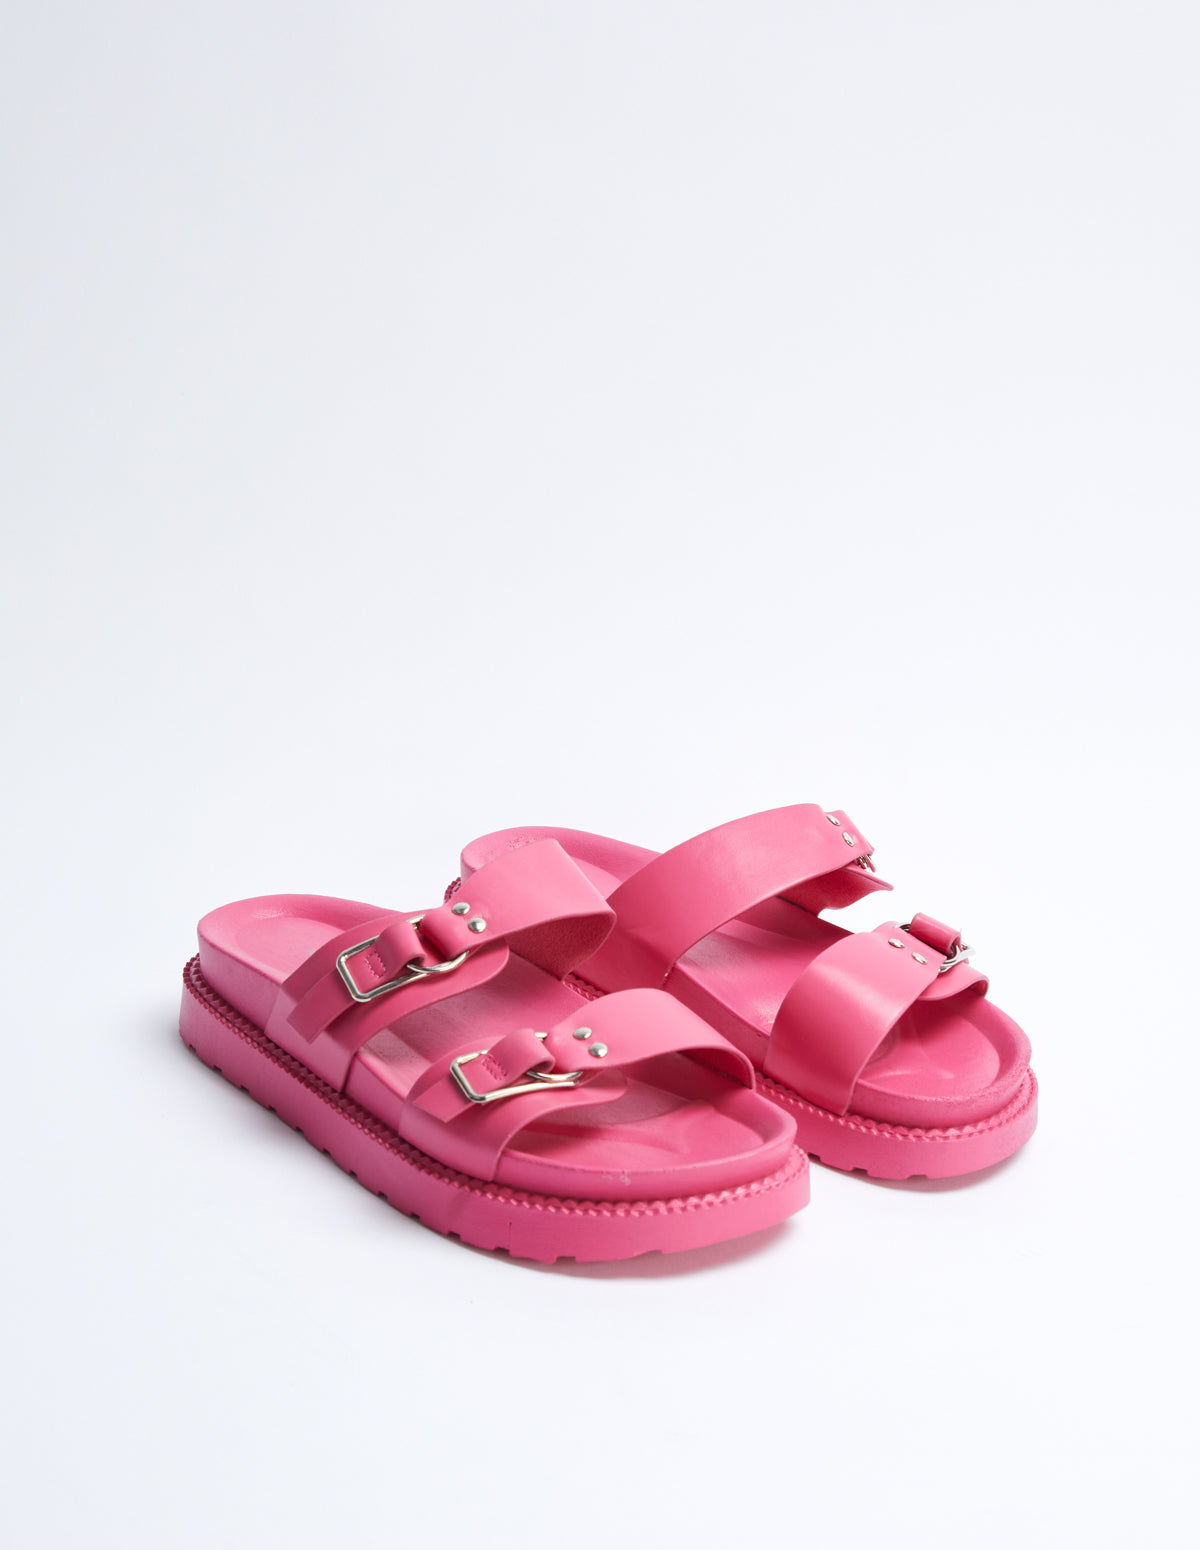 Two Strap Buckle Sandals - Apr